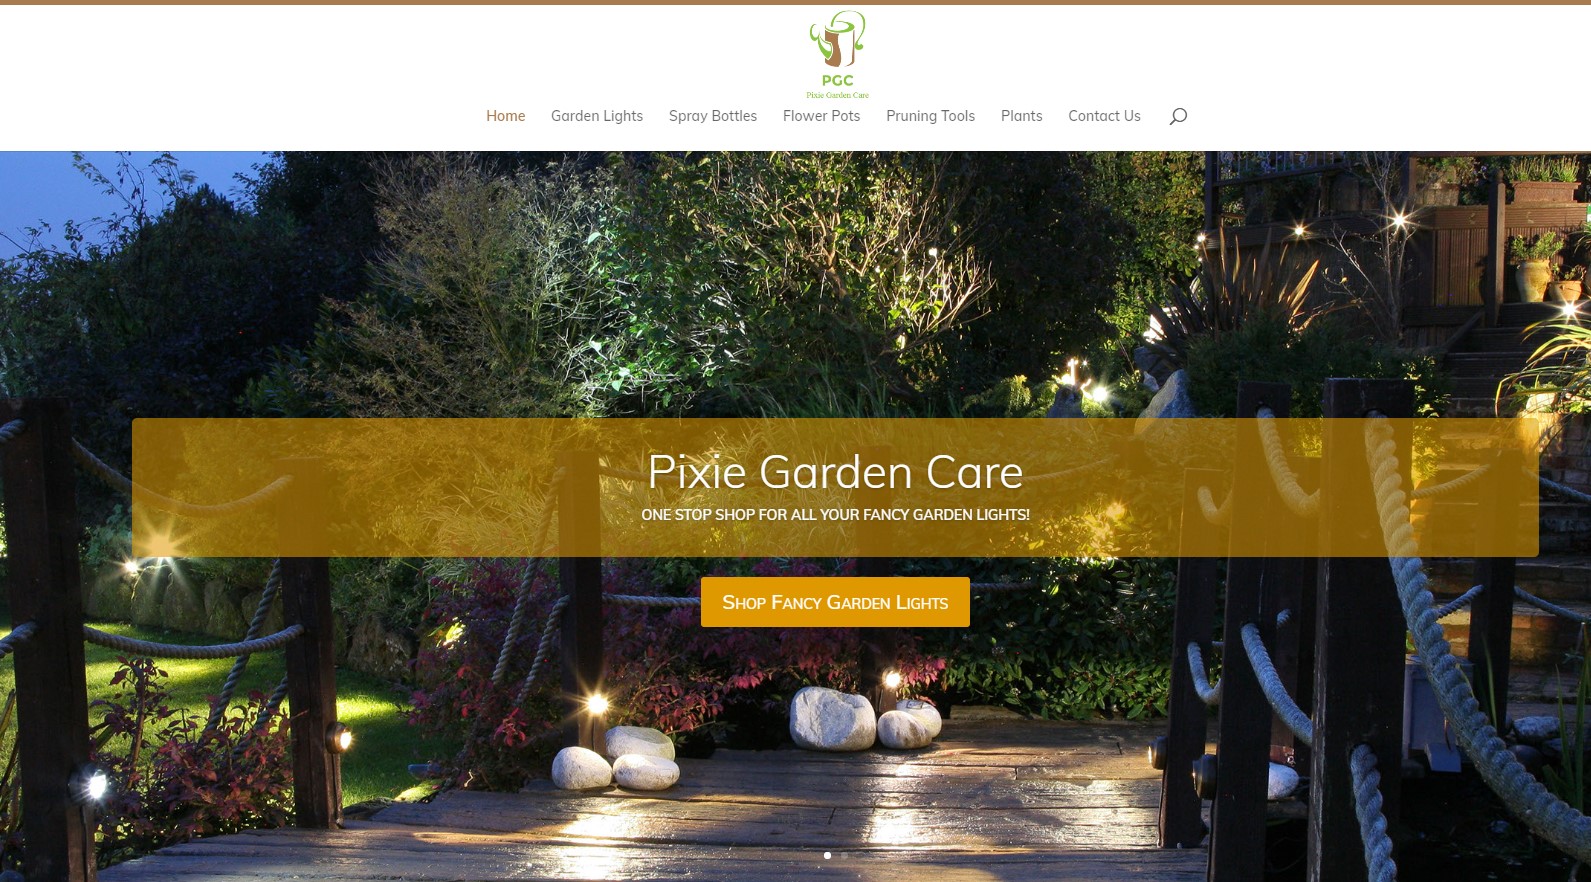 pixie garden care start your own dropship business